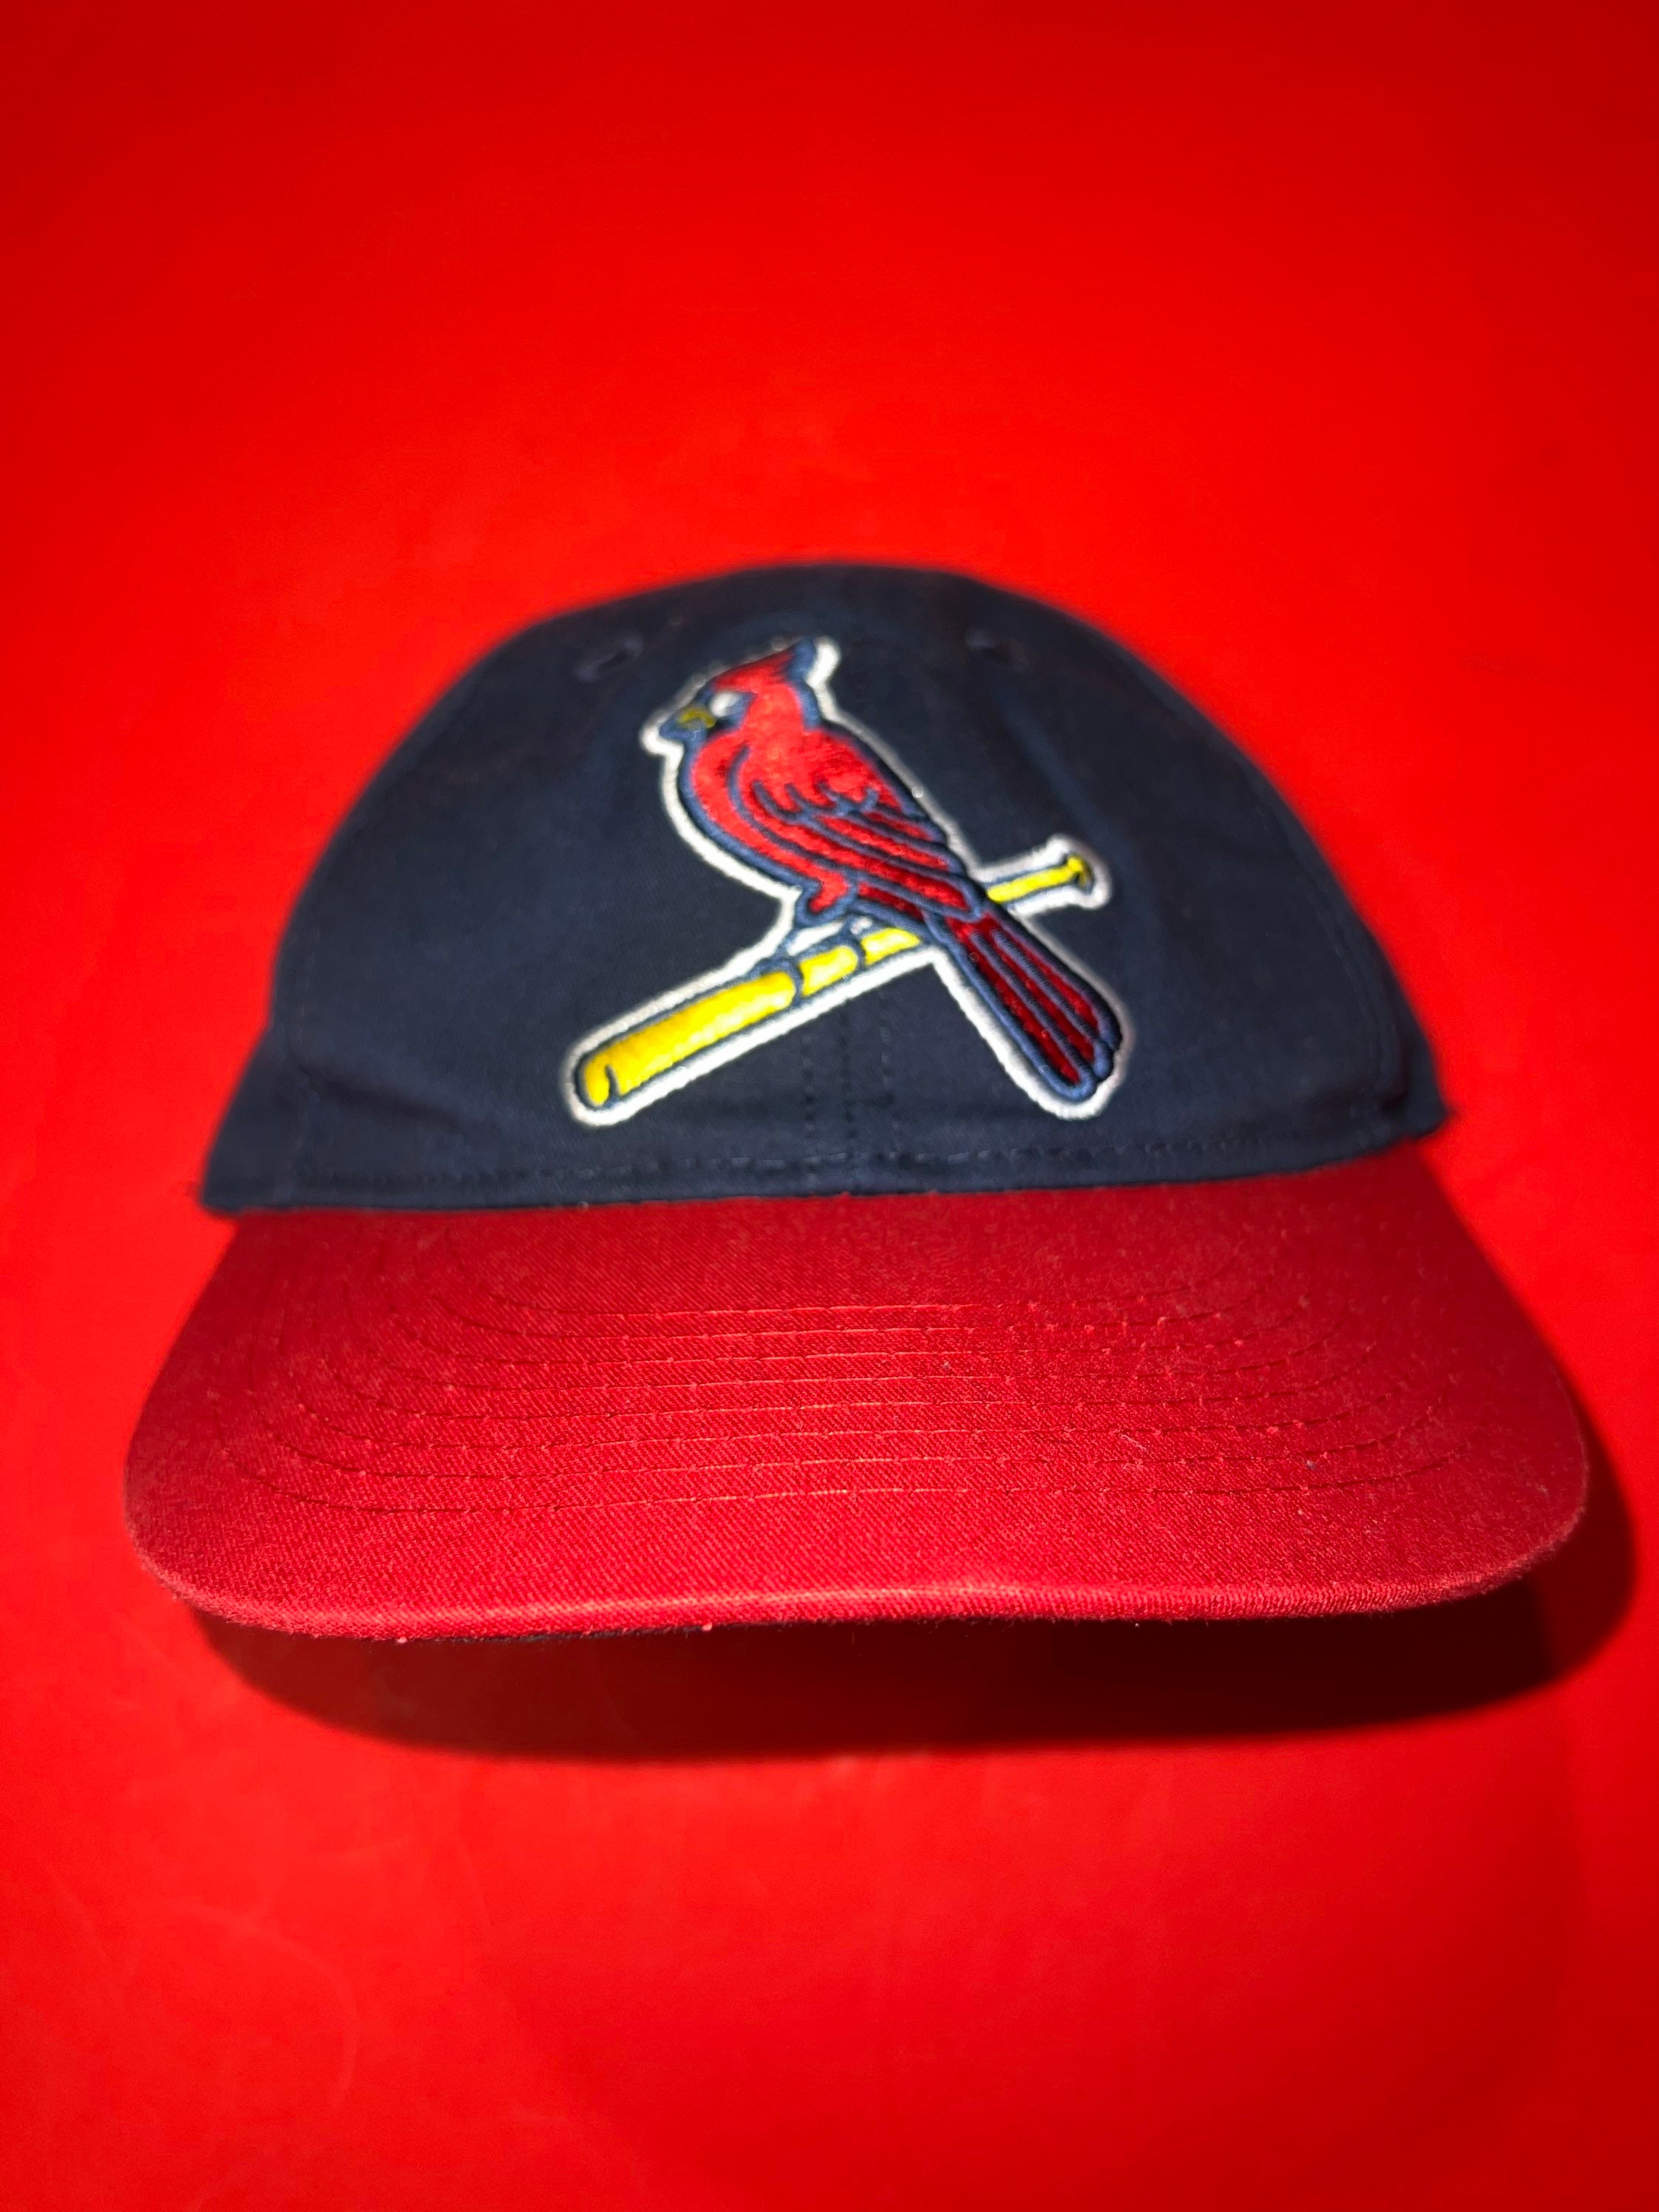 St Louis Cardinals Hat Youth Adjustable Team MLB Red Baseball Cap OC Sports